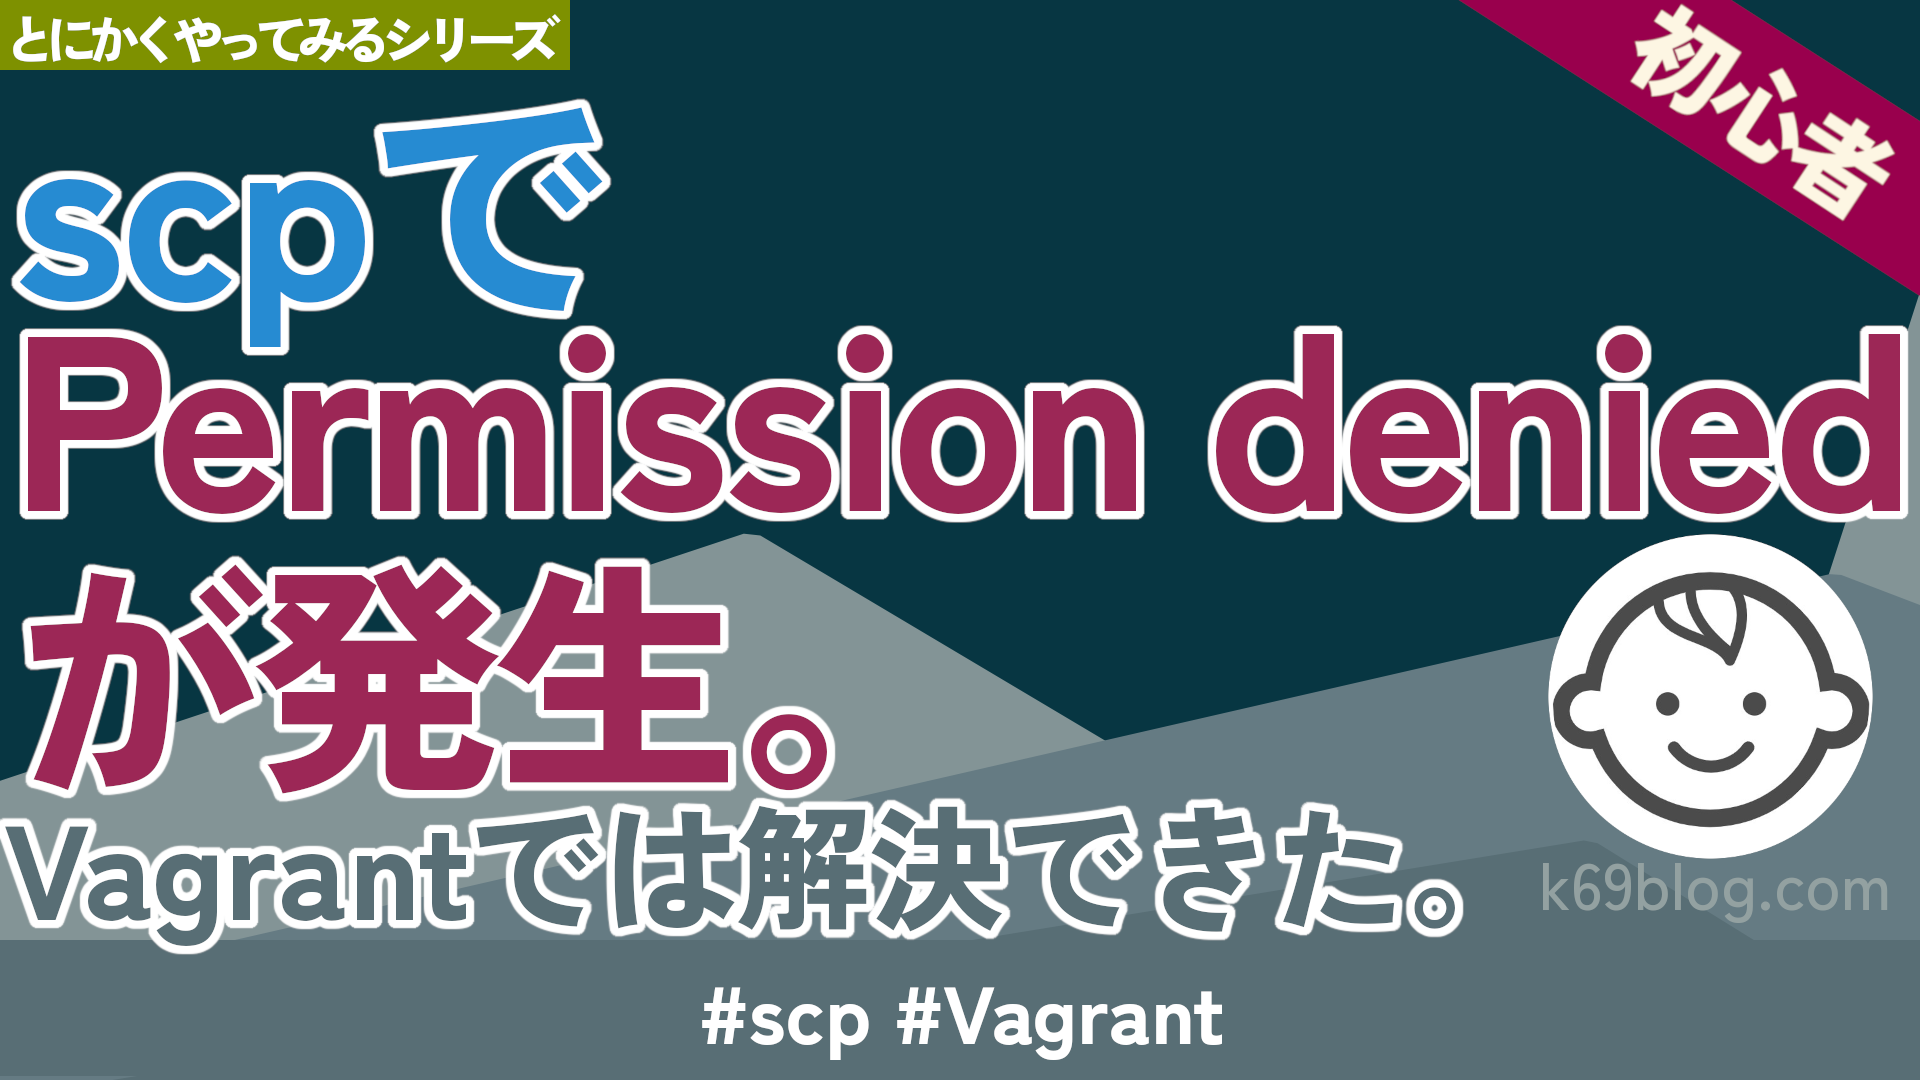 Cover Image for scpでPermission denied (publickey).が発生。Vagrantでは解決できた。